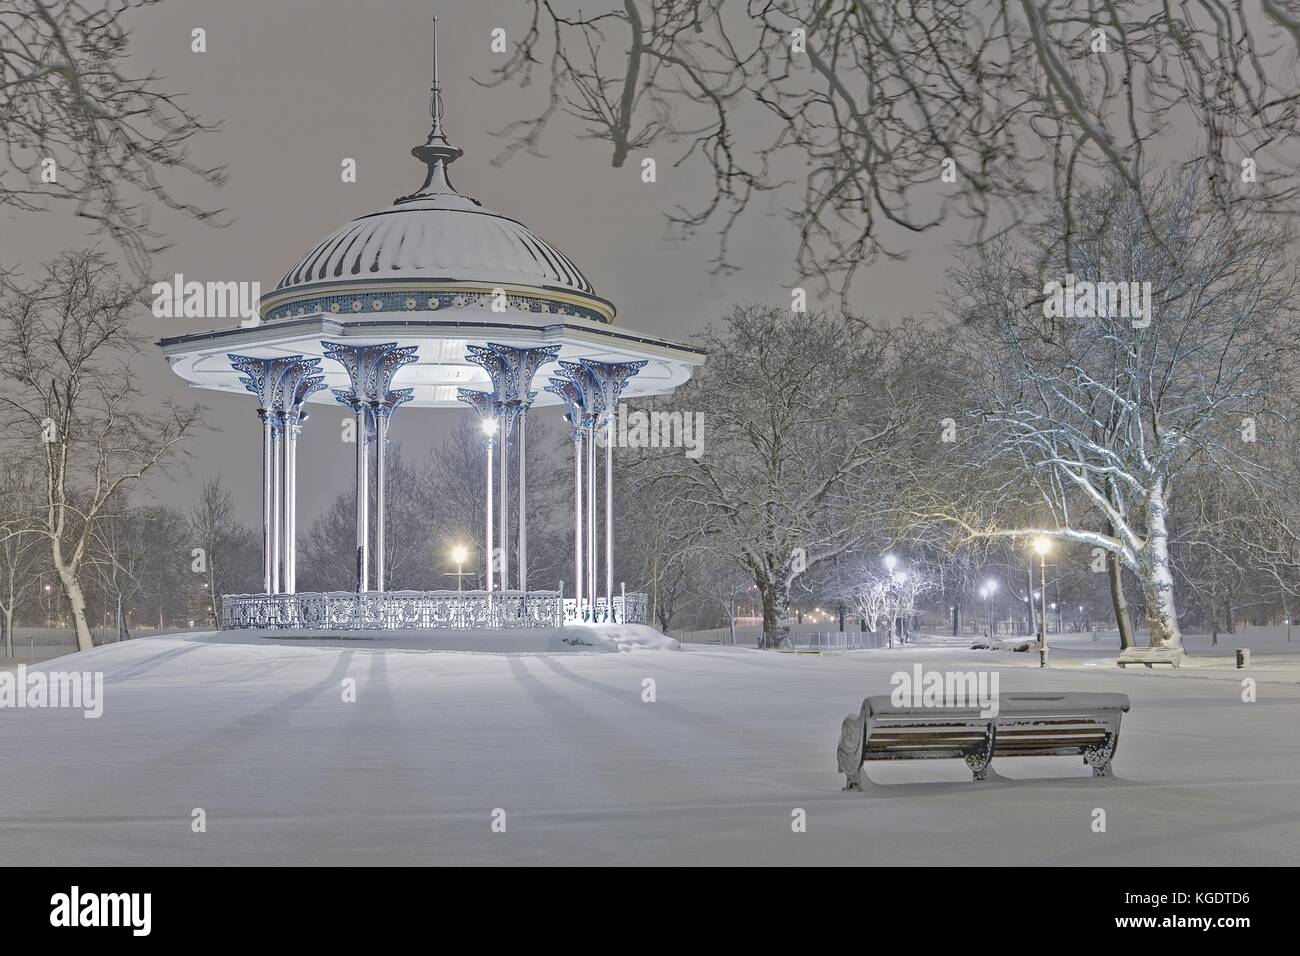 Clapham Common Bandstand in Winter, London Stock Photo